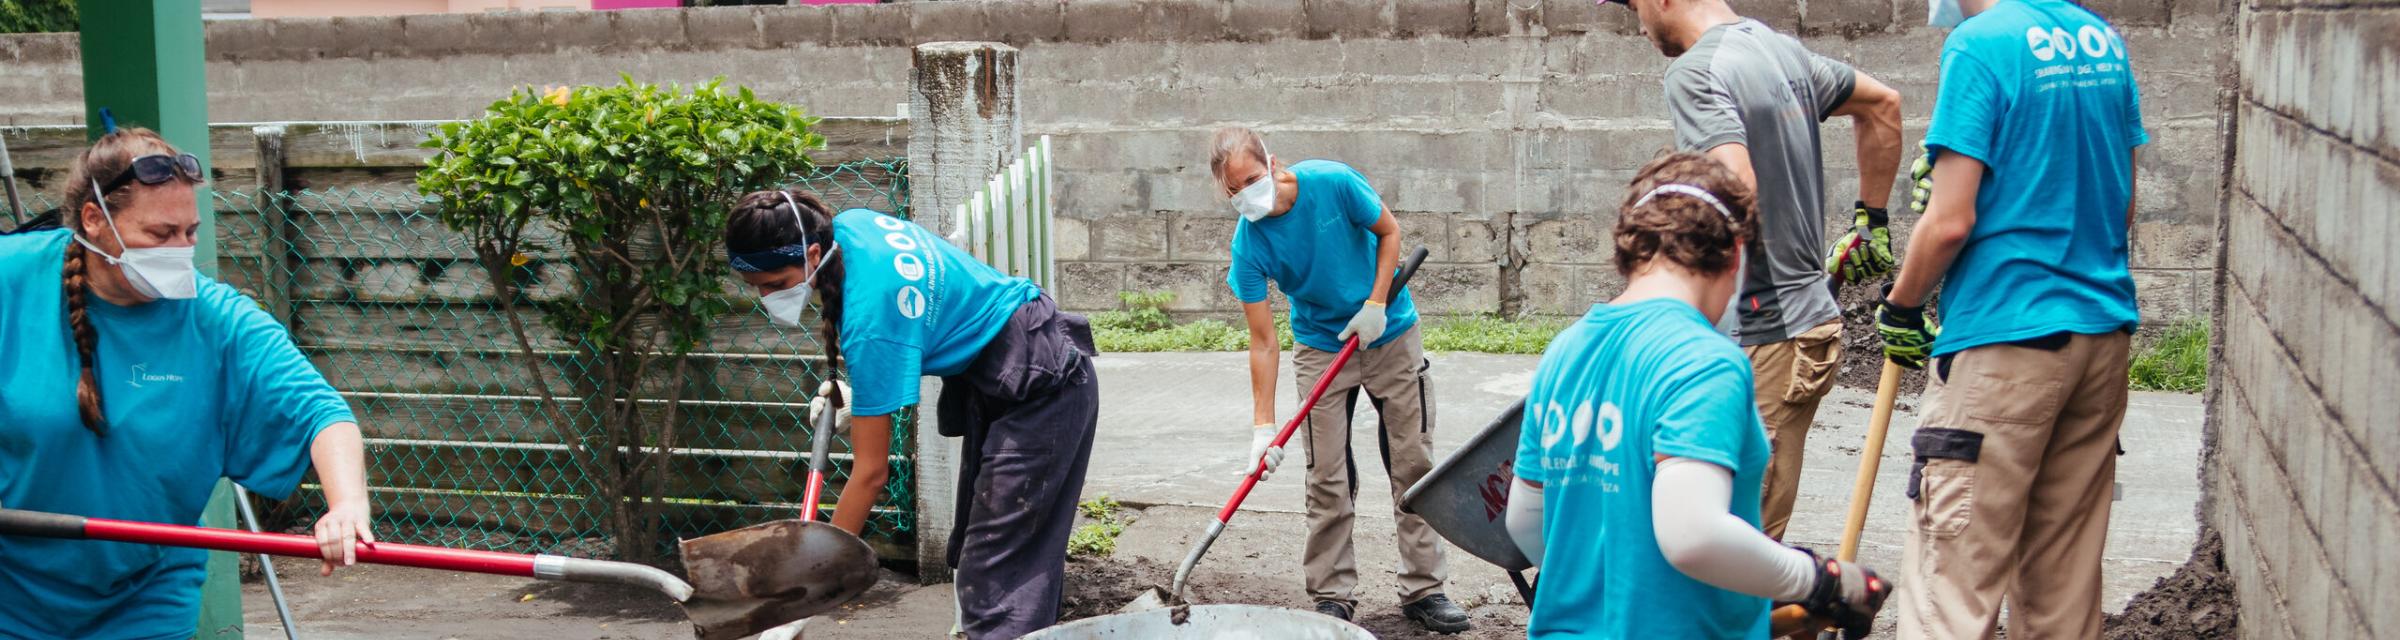 Kingstown, Saint Vincent and the Grenadines :: A Logos Hope team helps to clear ash left by the volcanic eruptions.